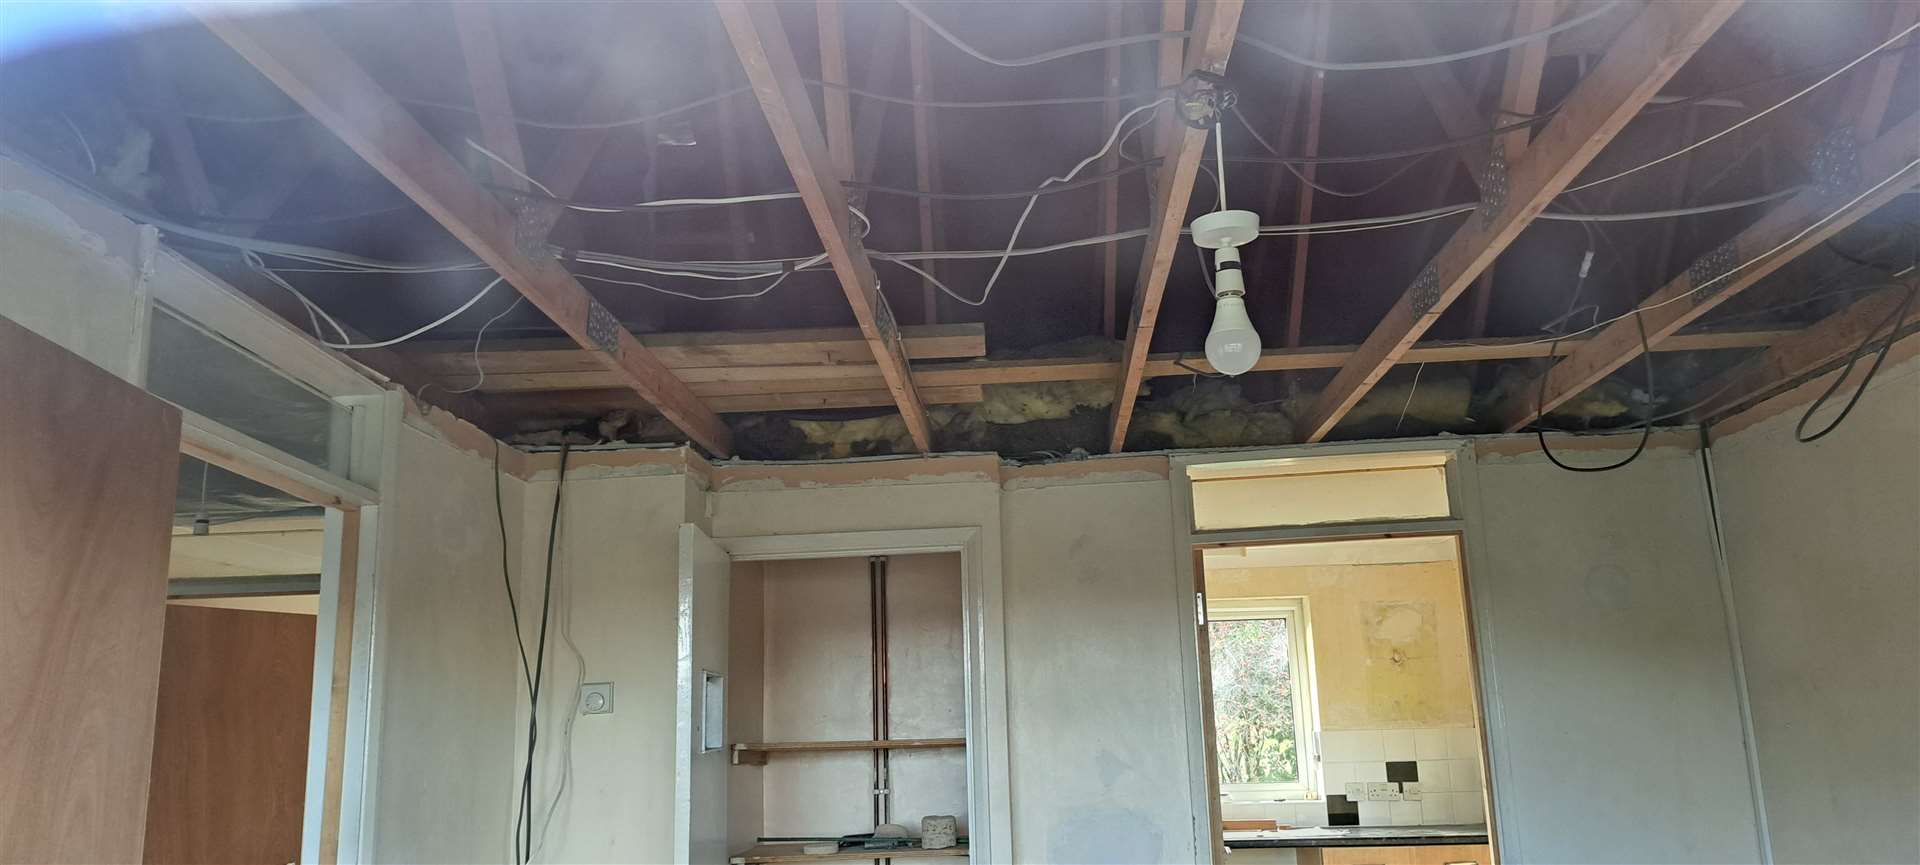 The property's ceilings have been removed